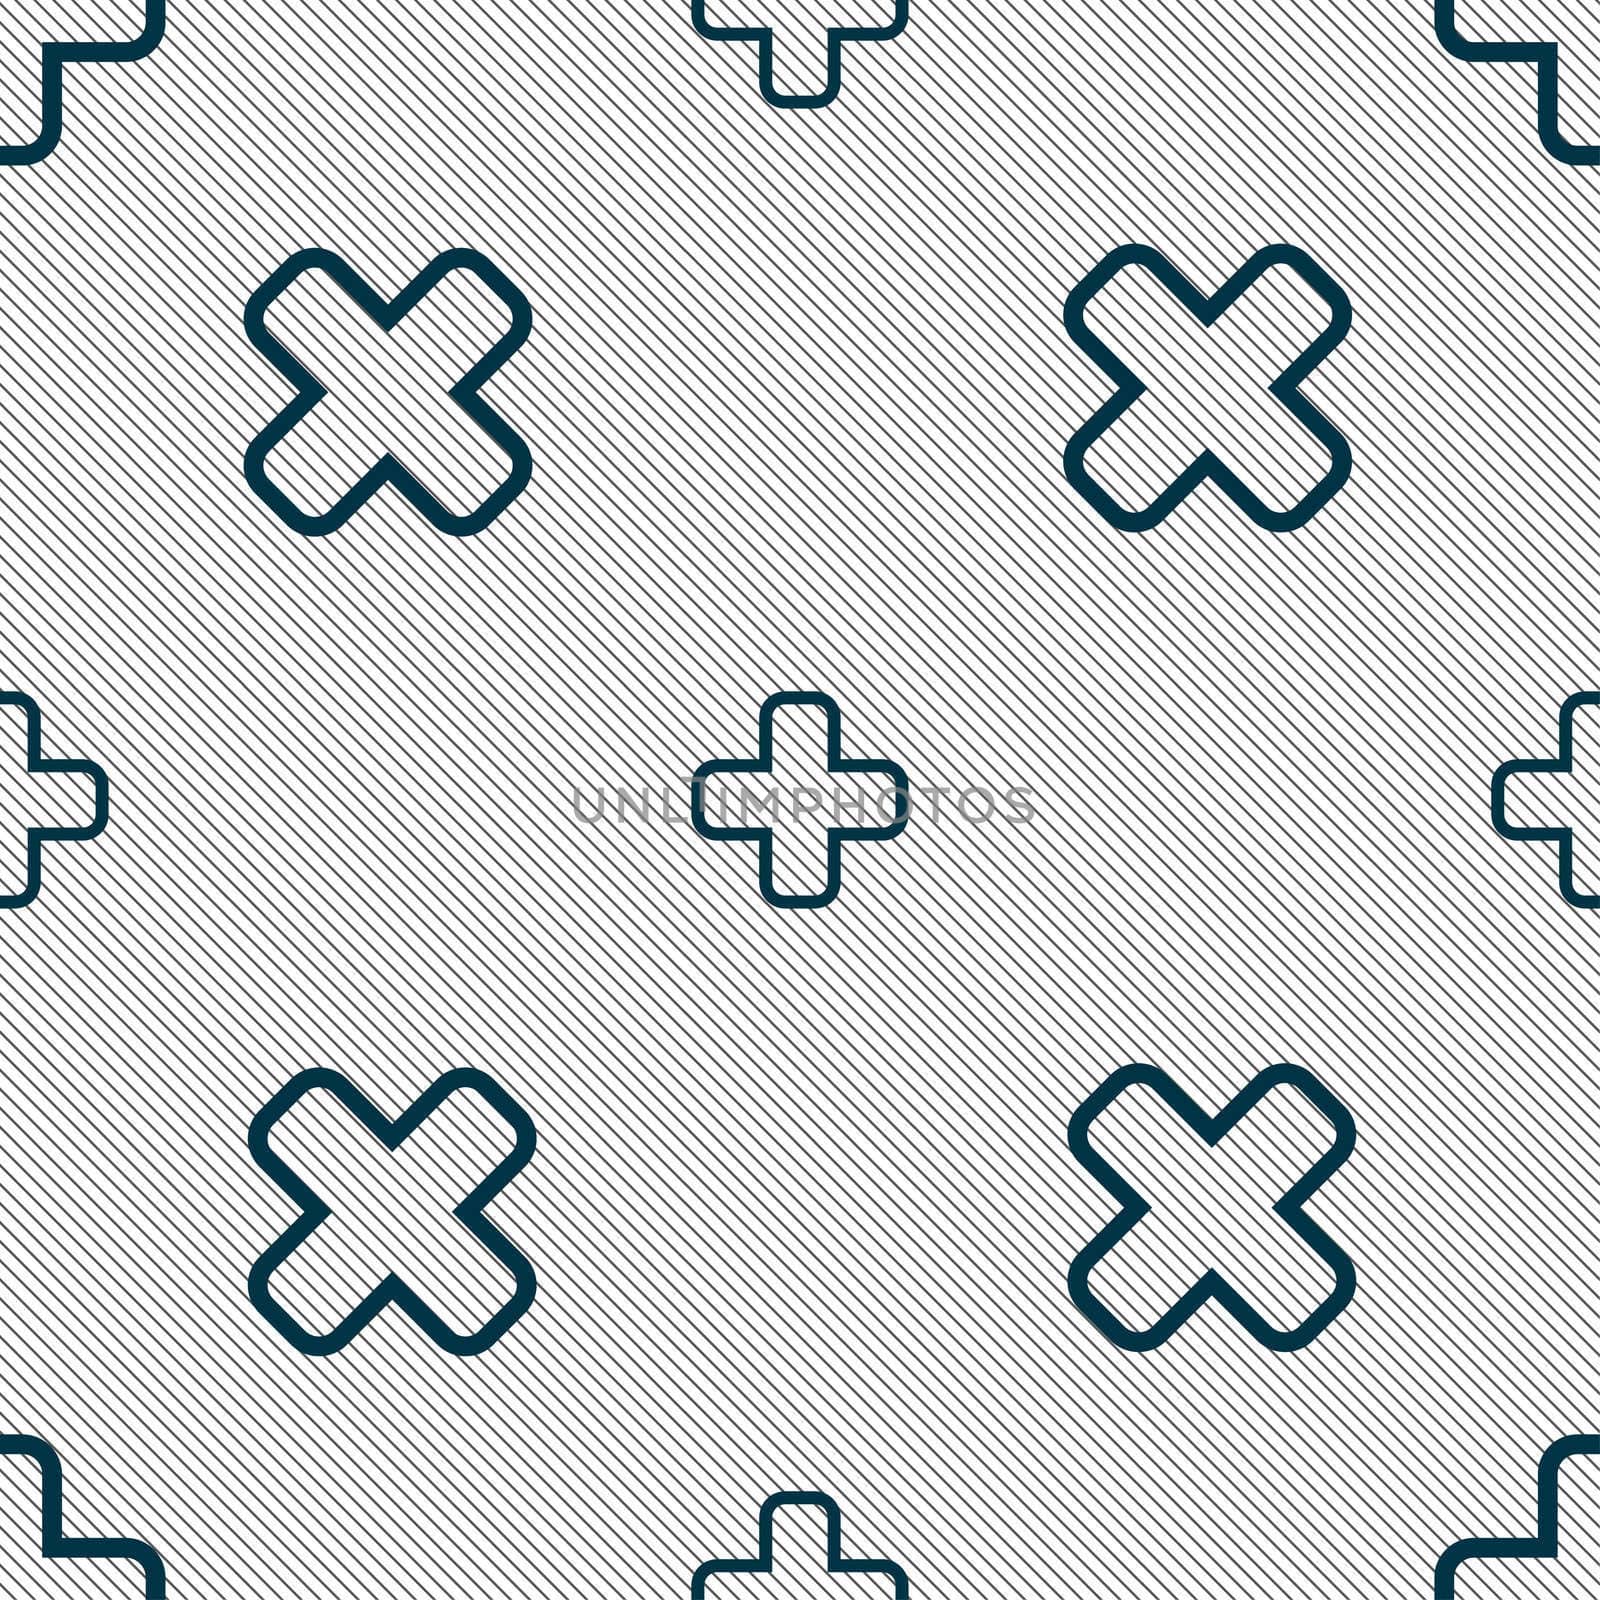 Plus icon sign. Seamless pattern with geometric texture. illustration